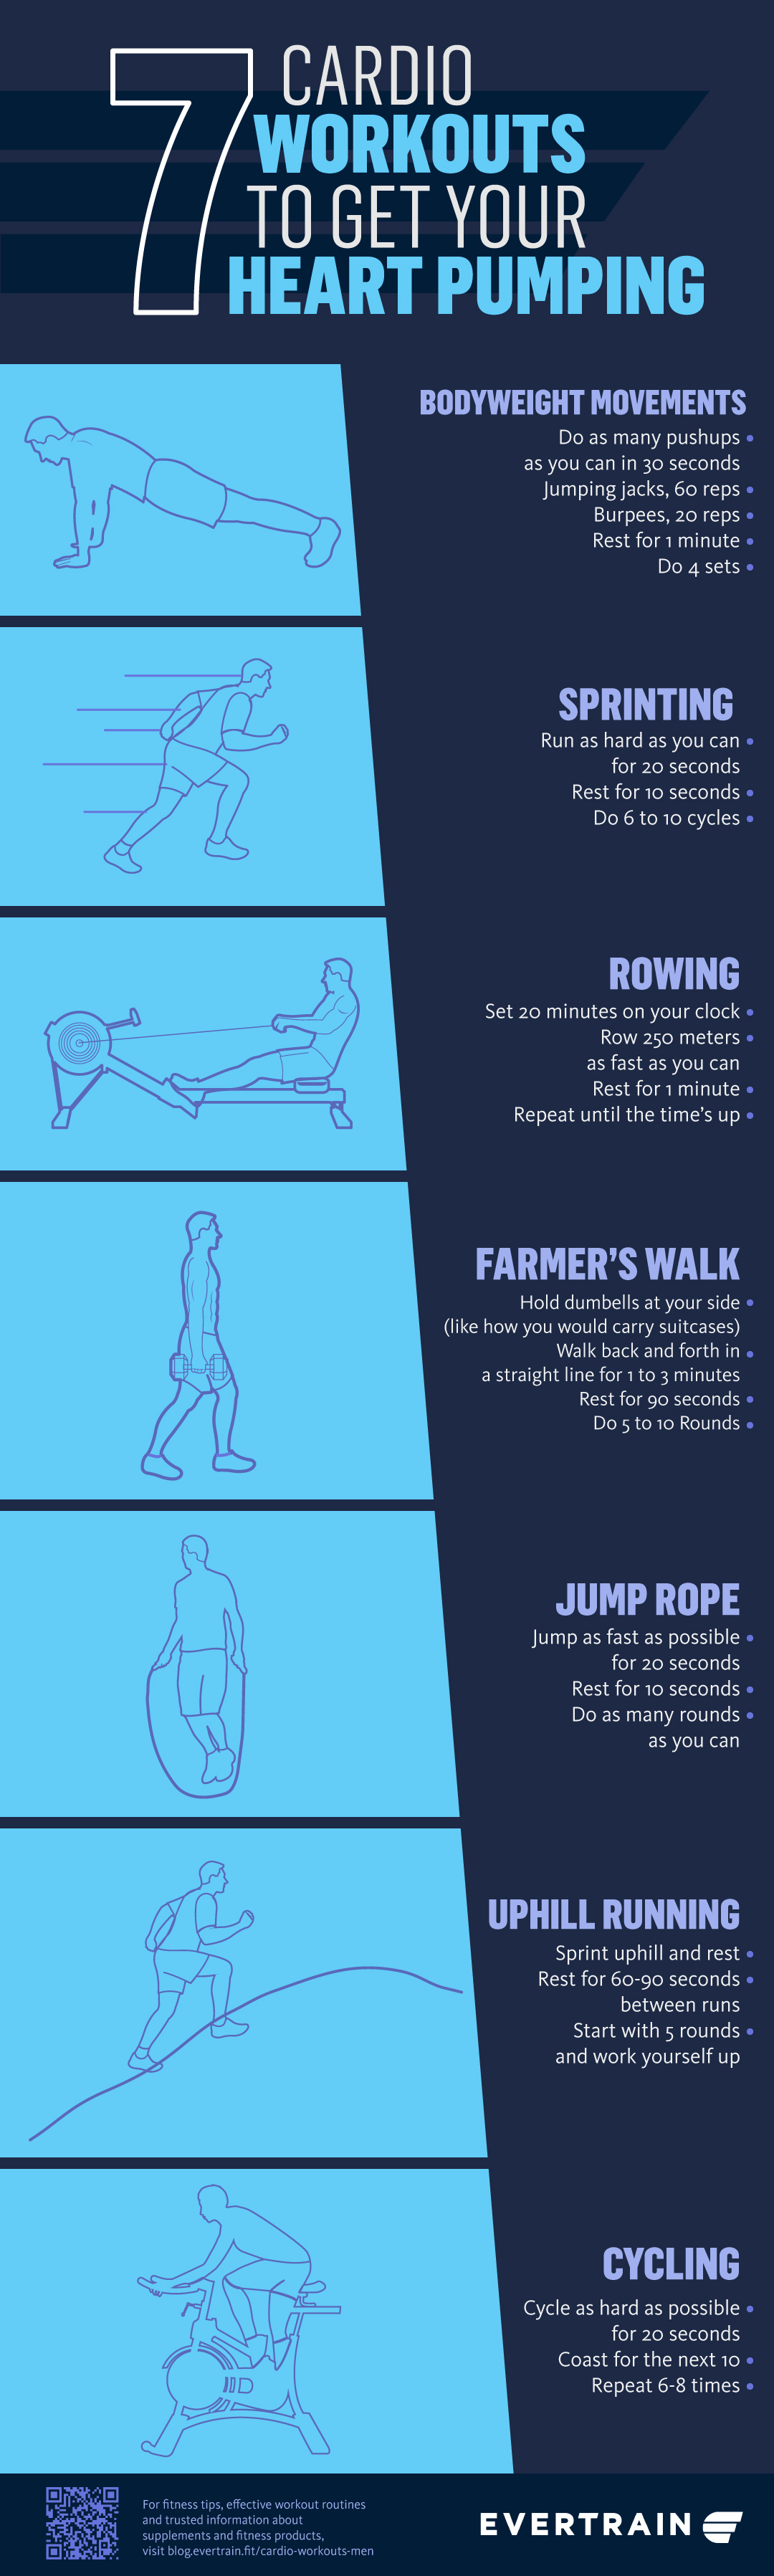 infographic | The Most Effective Cardio Workouts For Men [Infographic] | cardio workouts men